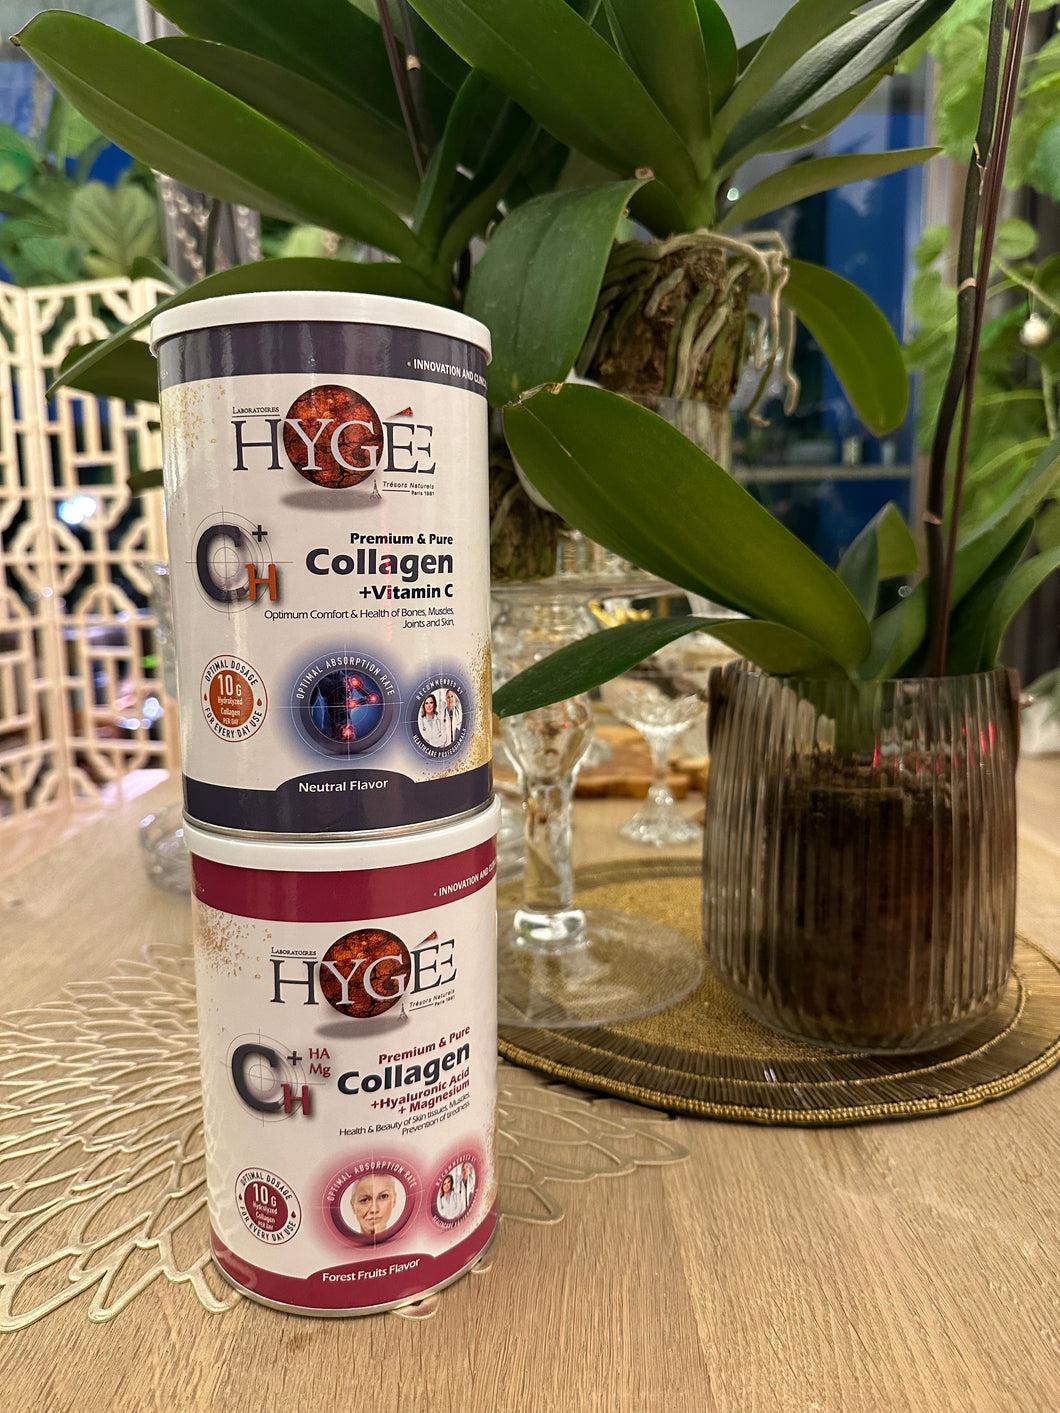 HYGEE CH+ Pure & Premium Hydrolysed Collagen – Global Care 300g